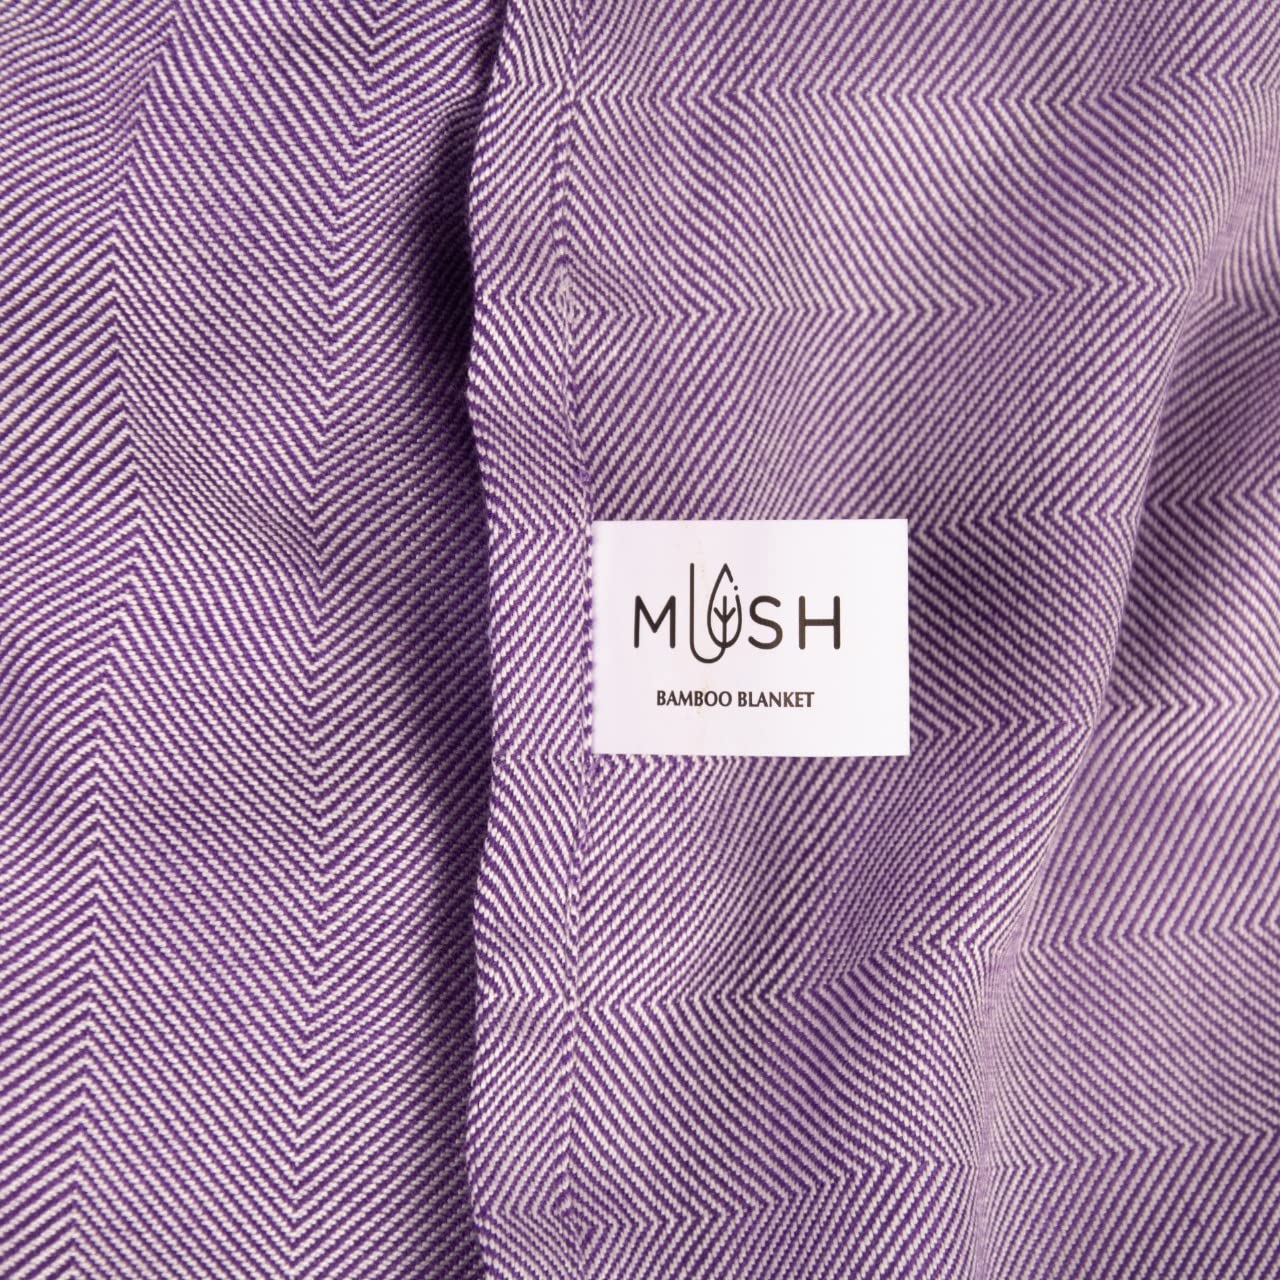 Mush Ultra-Soft, Light Weight & Thermoregulating, All Season 100% Bamboo Blanket & Dohar (Lavender, Small - 3.33 x 4.5 ft)